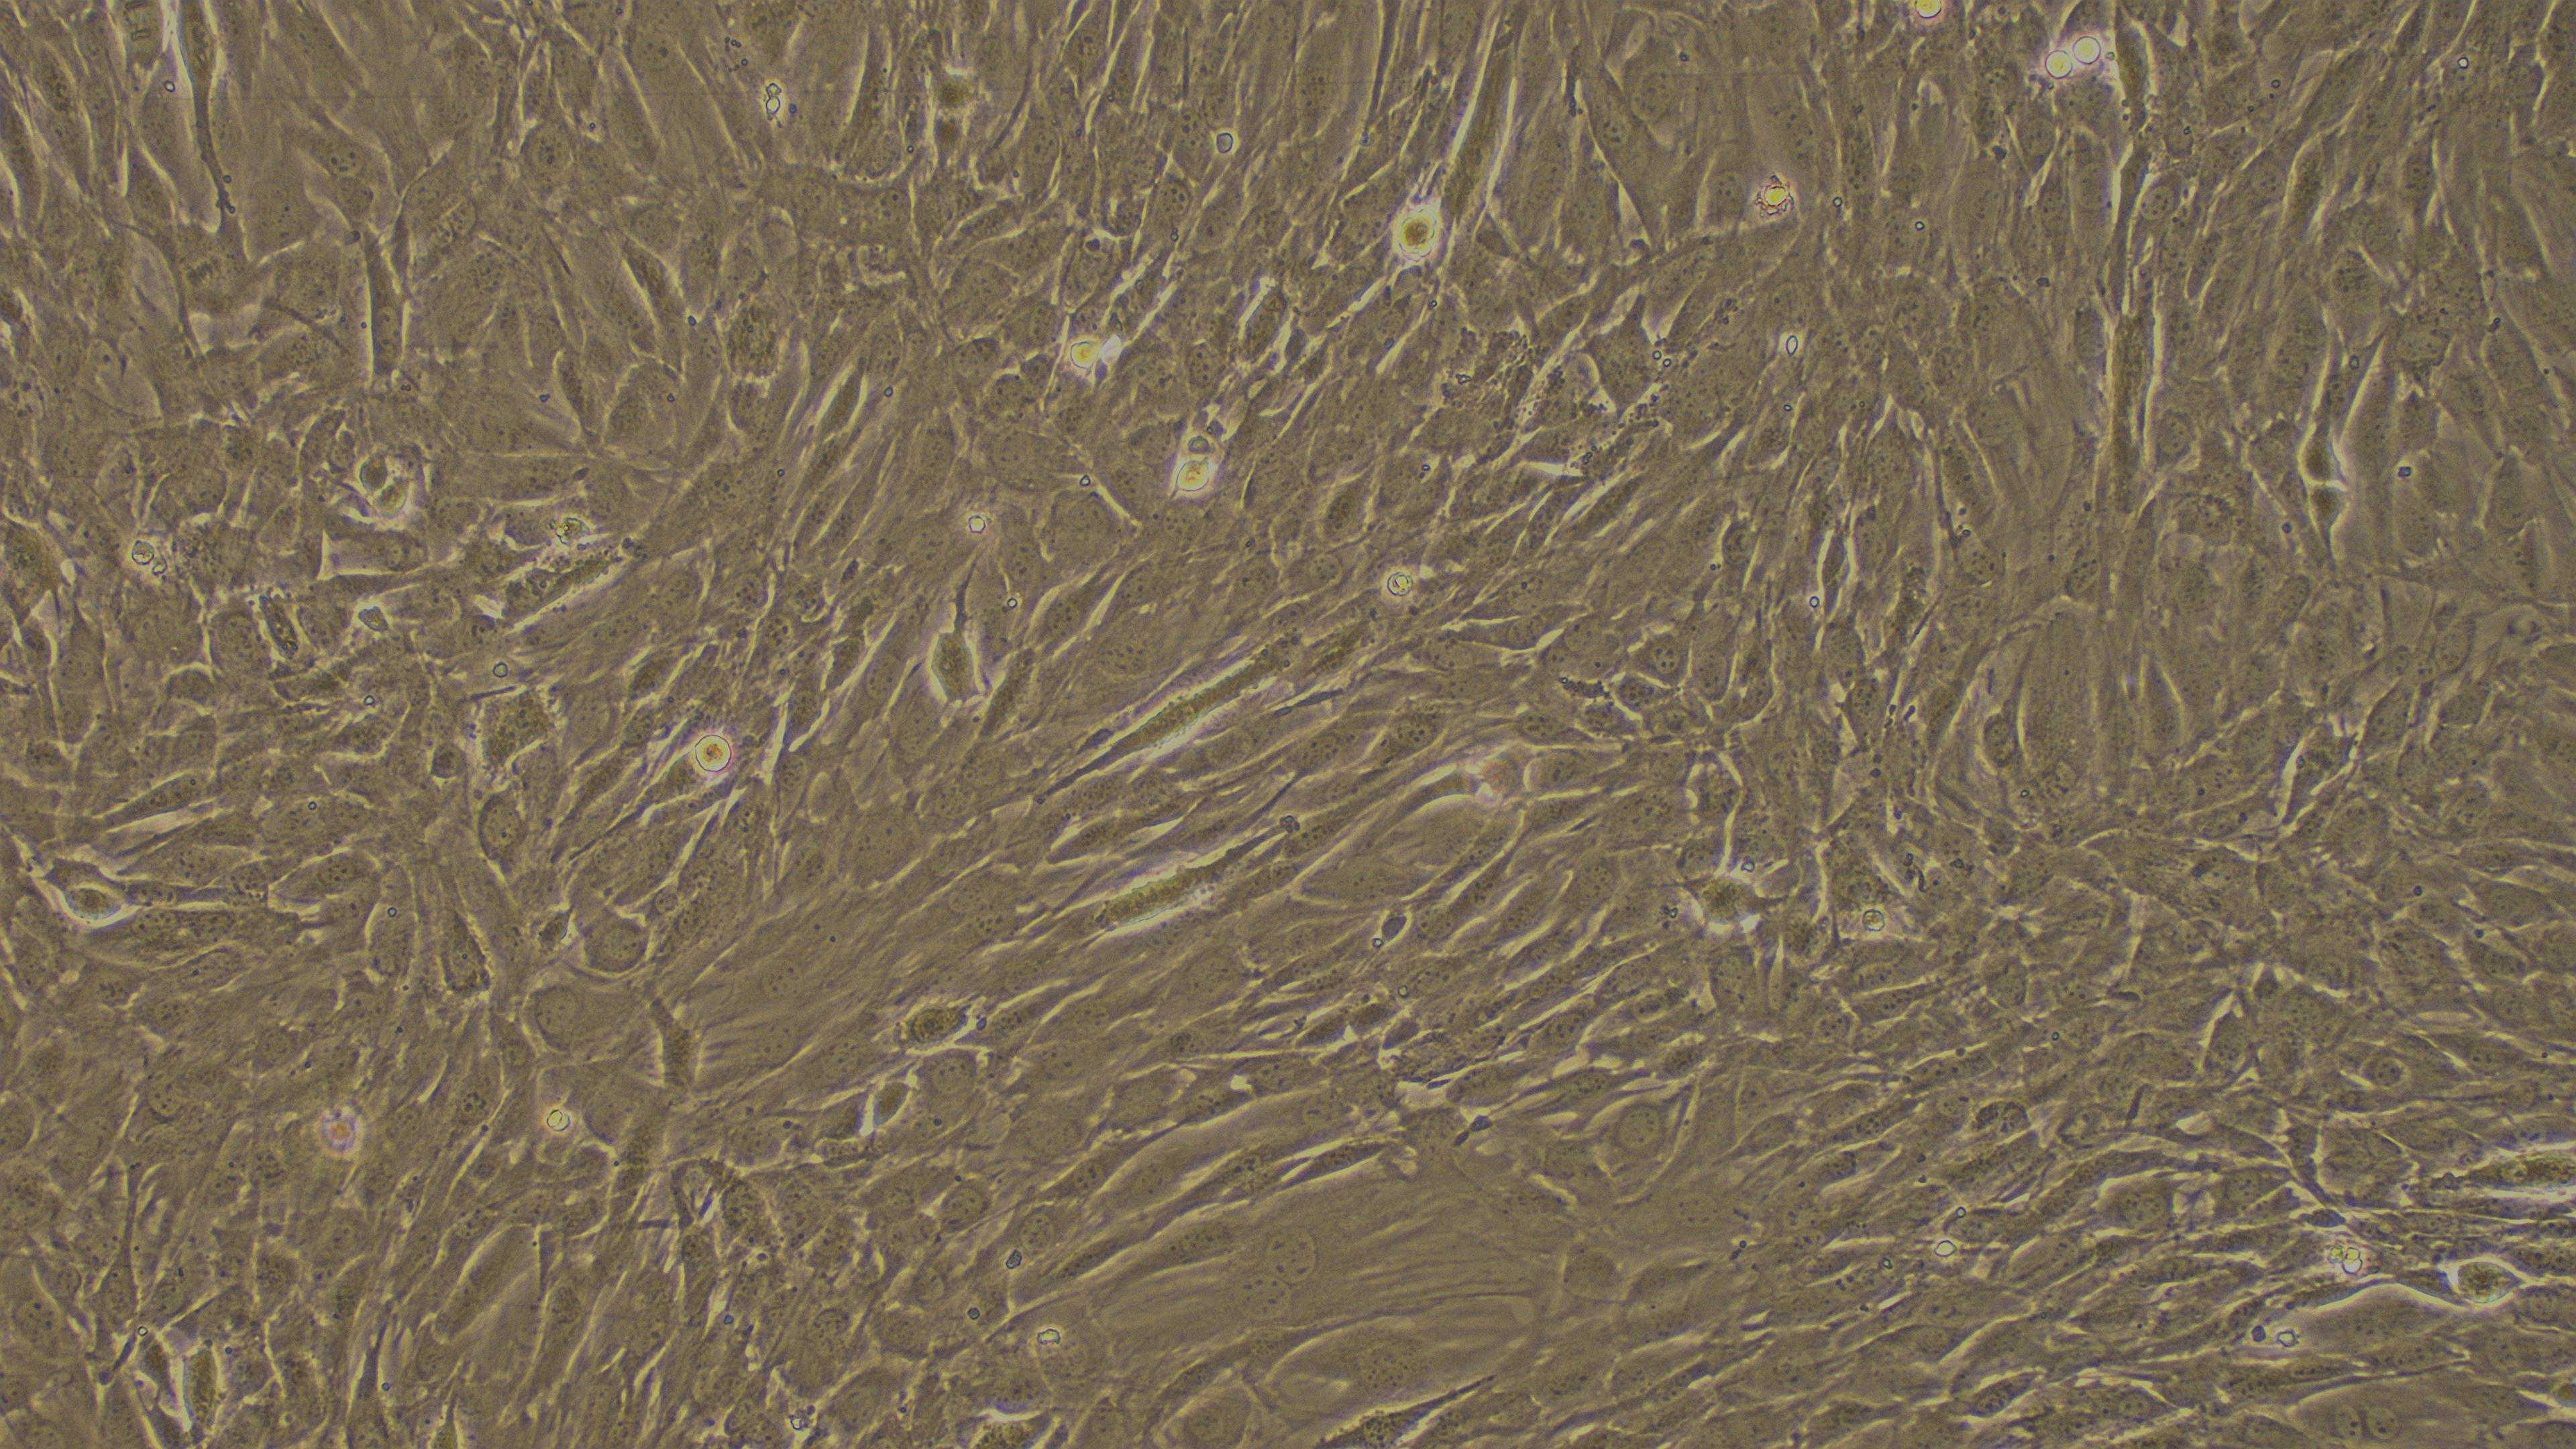 Primary Mouse Umbilical Vein Smooth Muscle Cells (UVSMC)